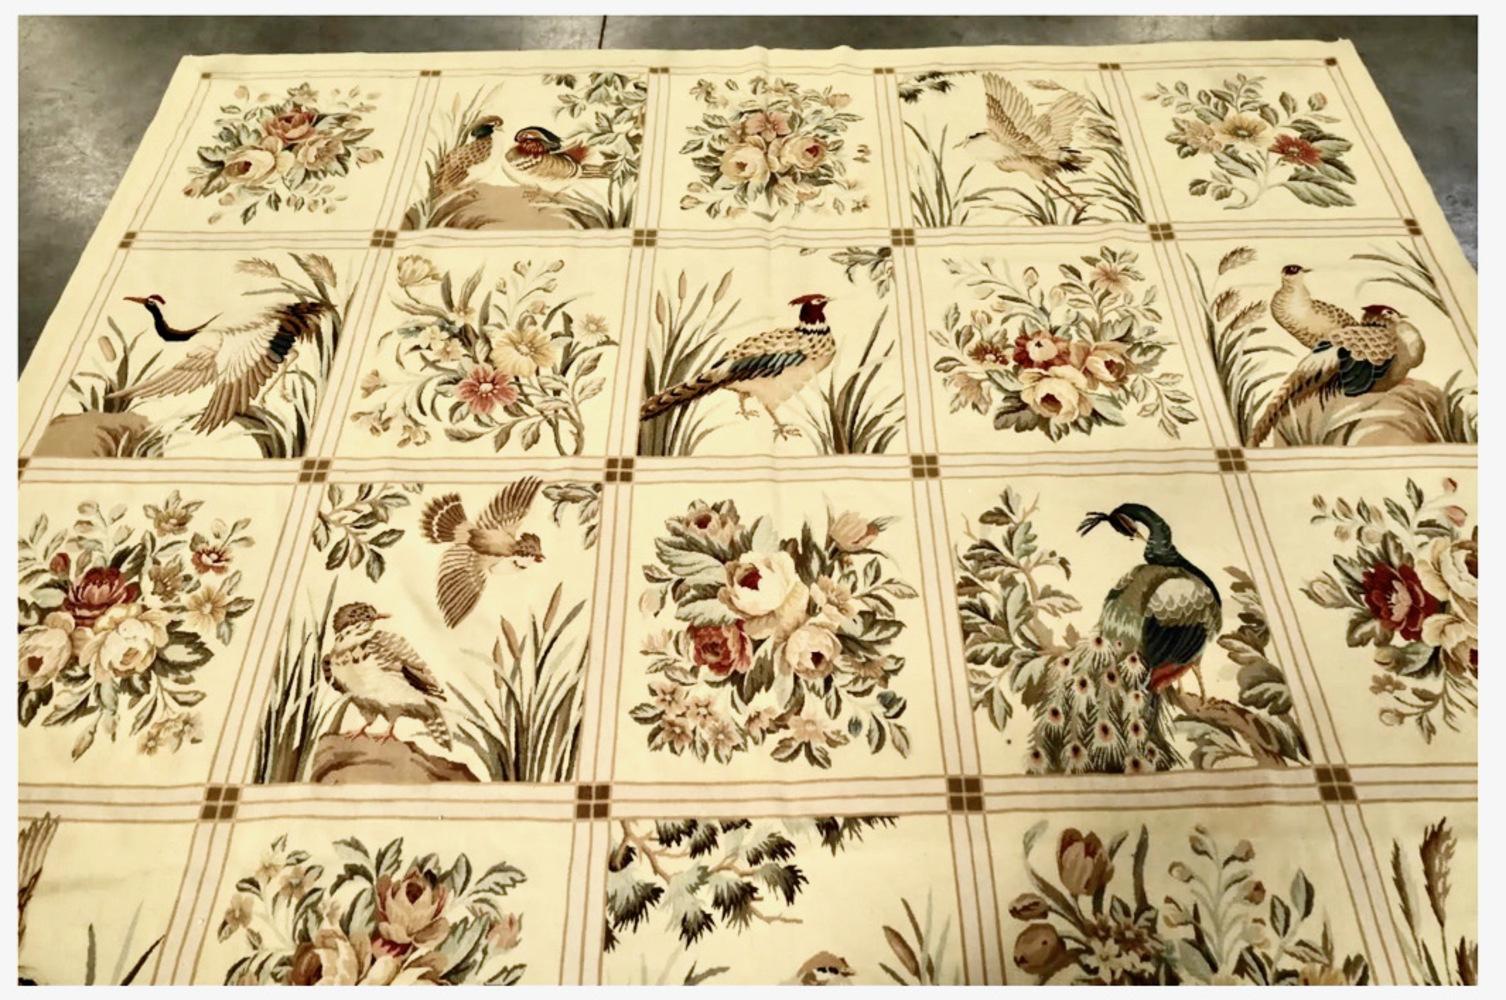 This is a charming late 20th century Aubusson-style tapestry or rug featuring     -------of hunting foul alternating with floral --------. The birds are well-detailed and clearly identifiable. This textile is a great representation of the Coastal